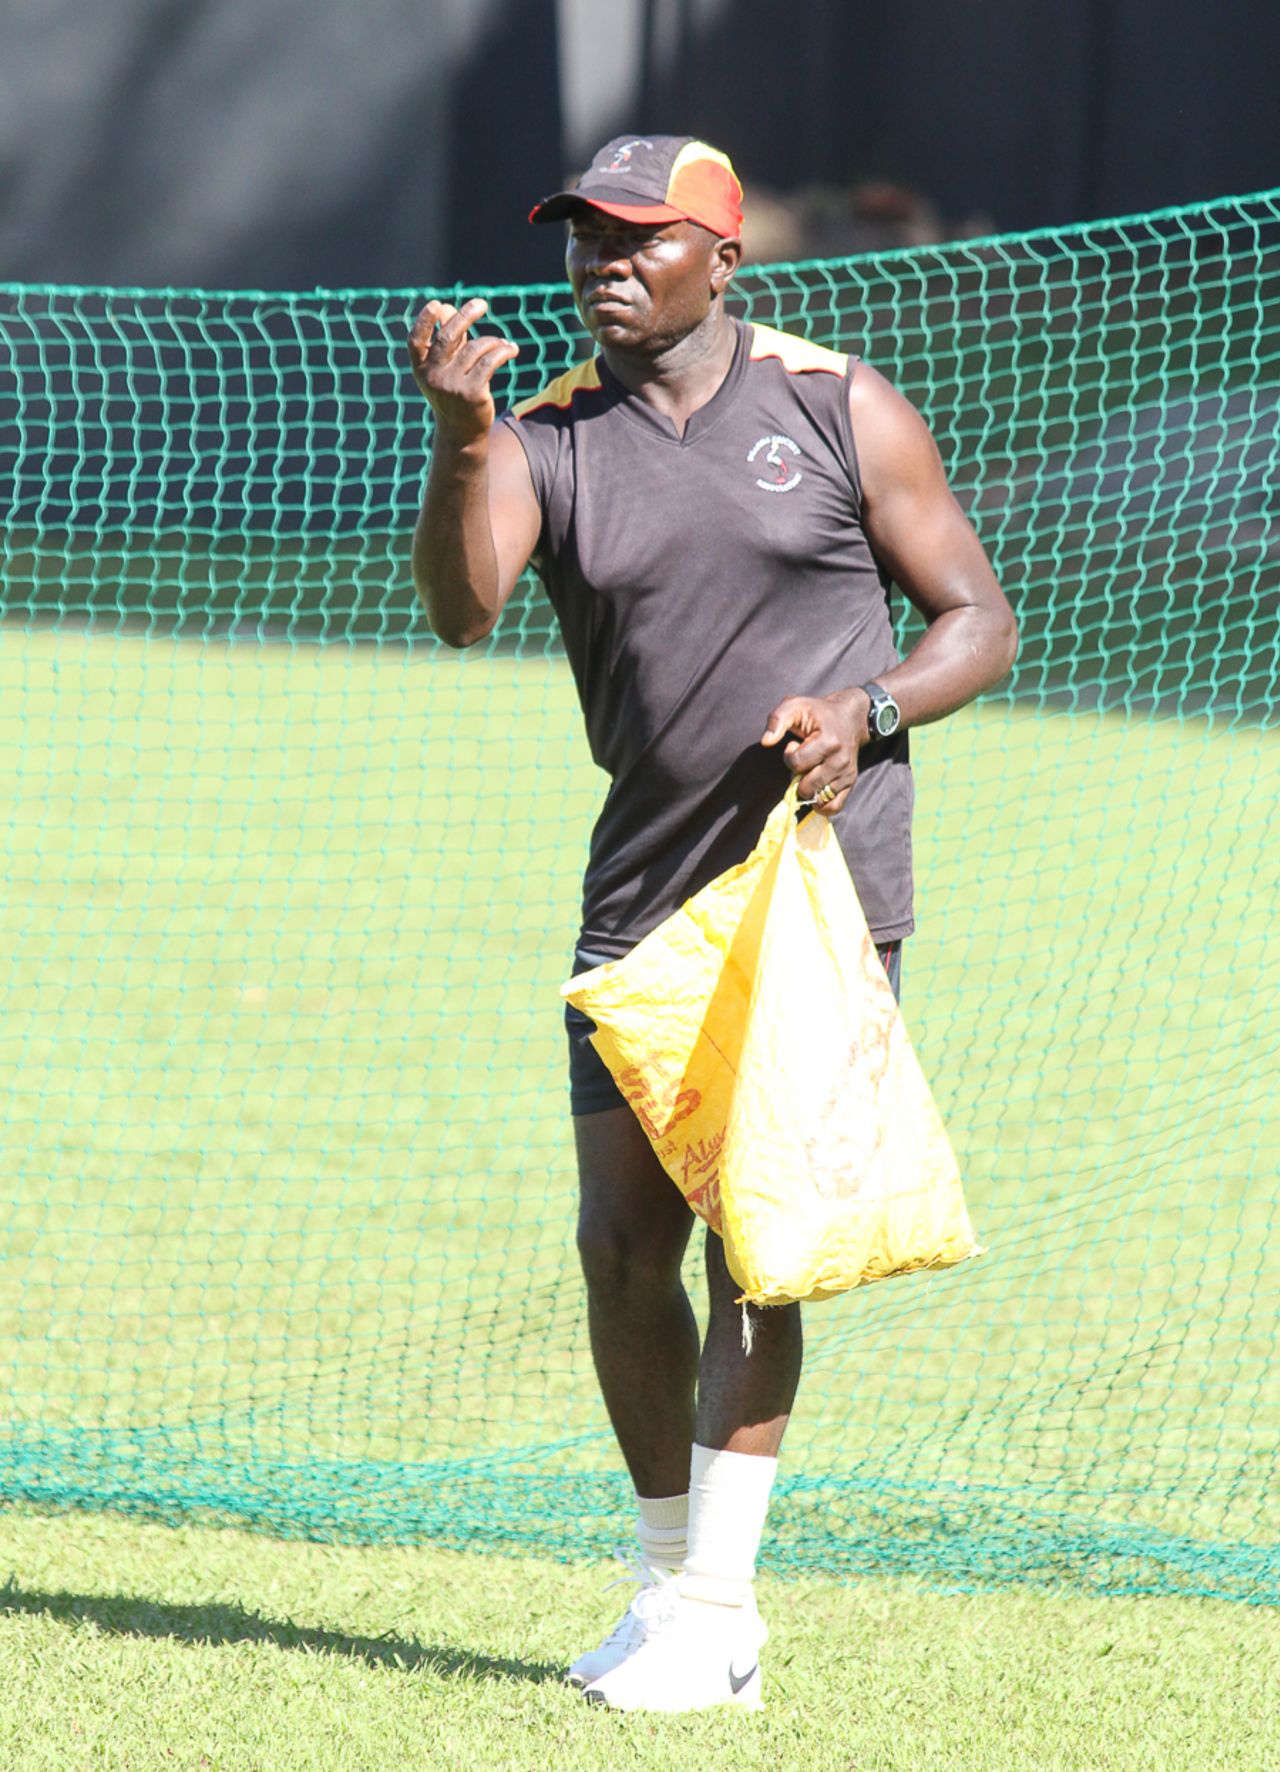 Uganda coach Steve Tikolo helps a batsman practice the sweep with some underhand throws, ICC World Cricket League Division Three, Kampala, May 25, 2017